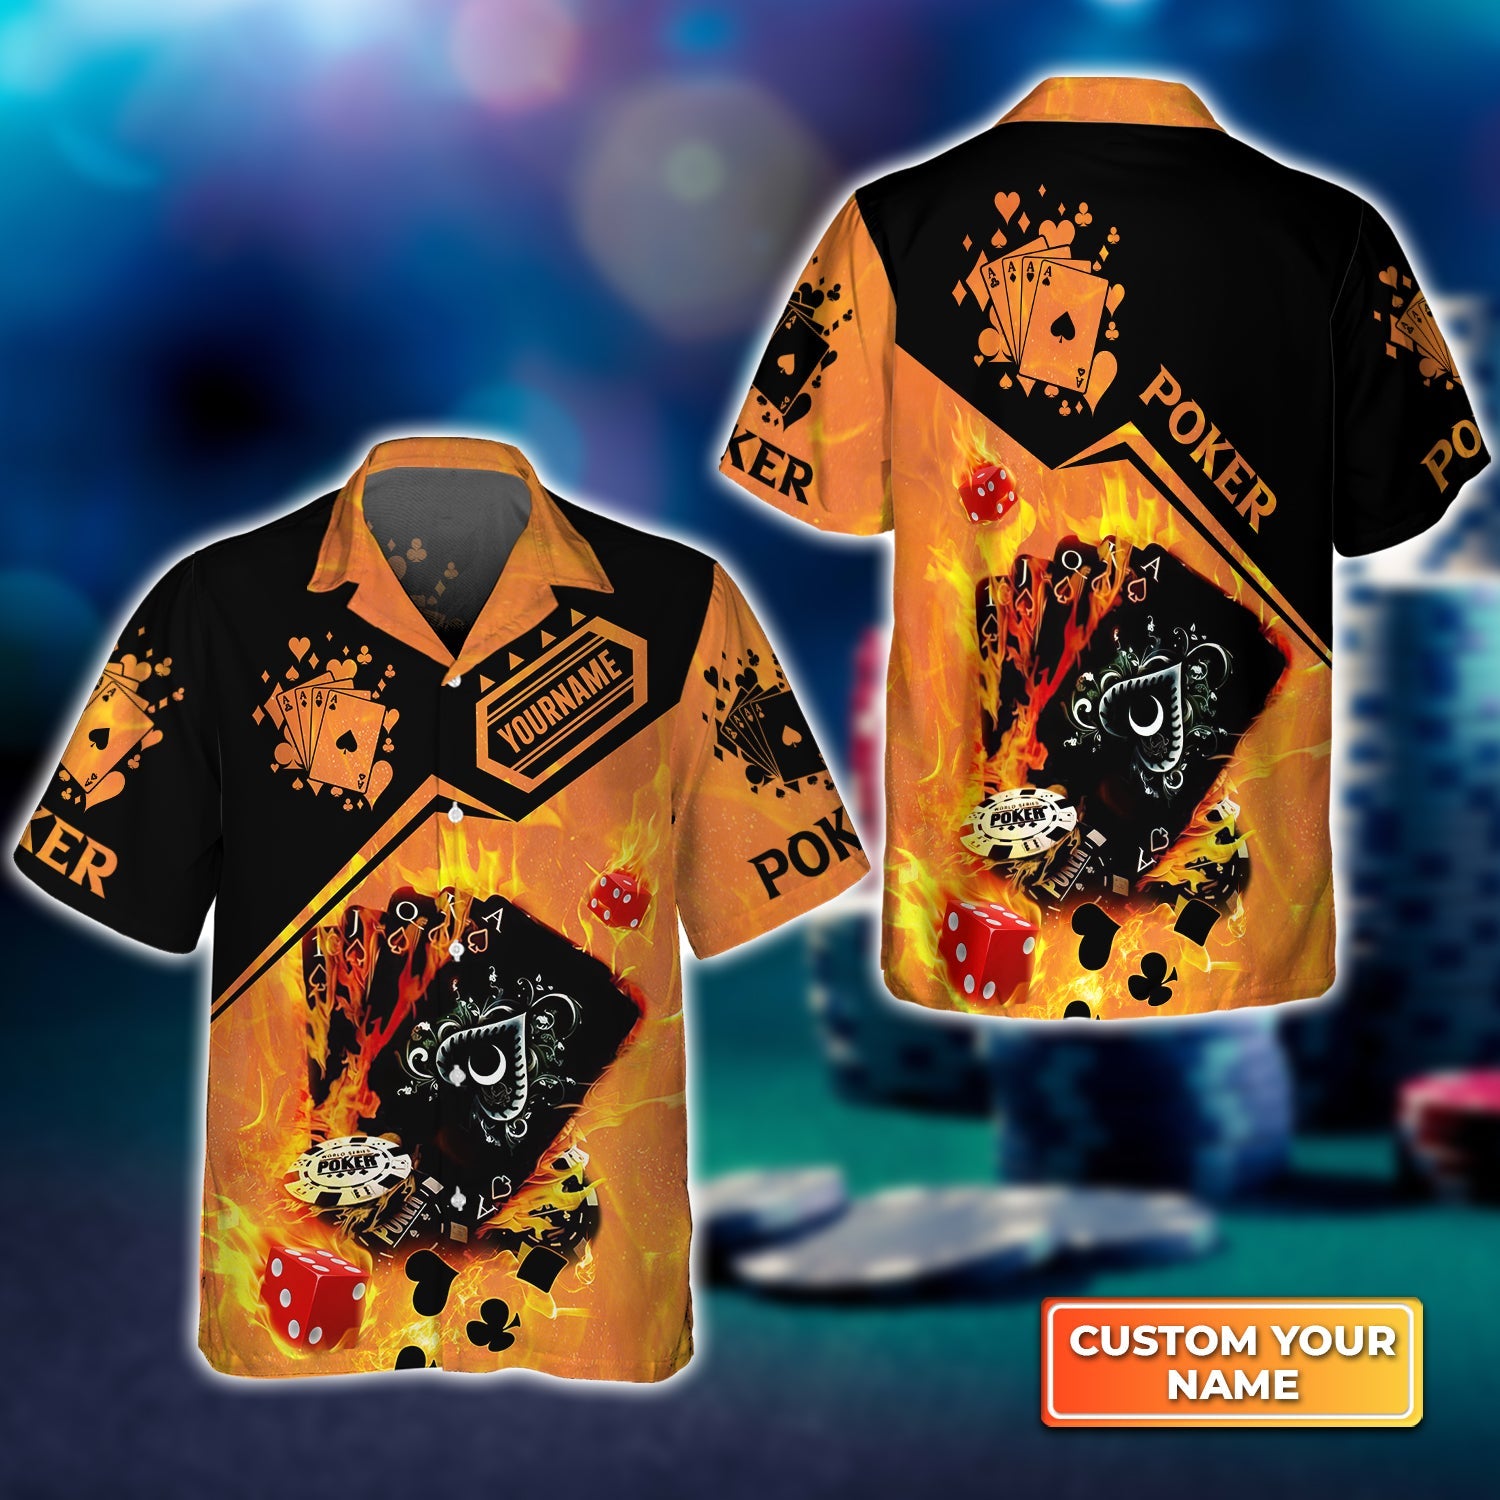 Poker Royal Flush On Fire Personalized Name 3D Hawaiian Shirt For Poker Players